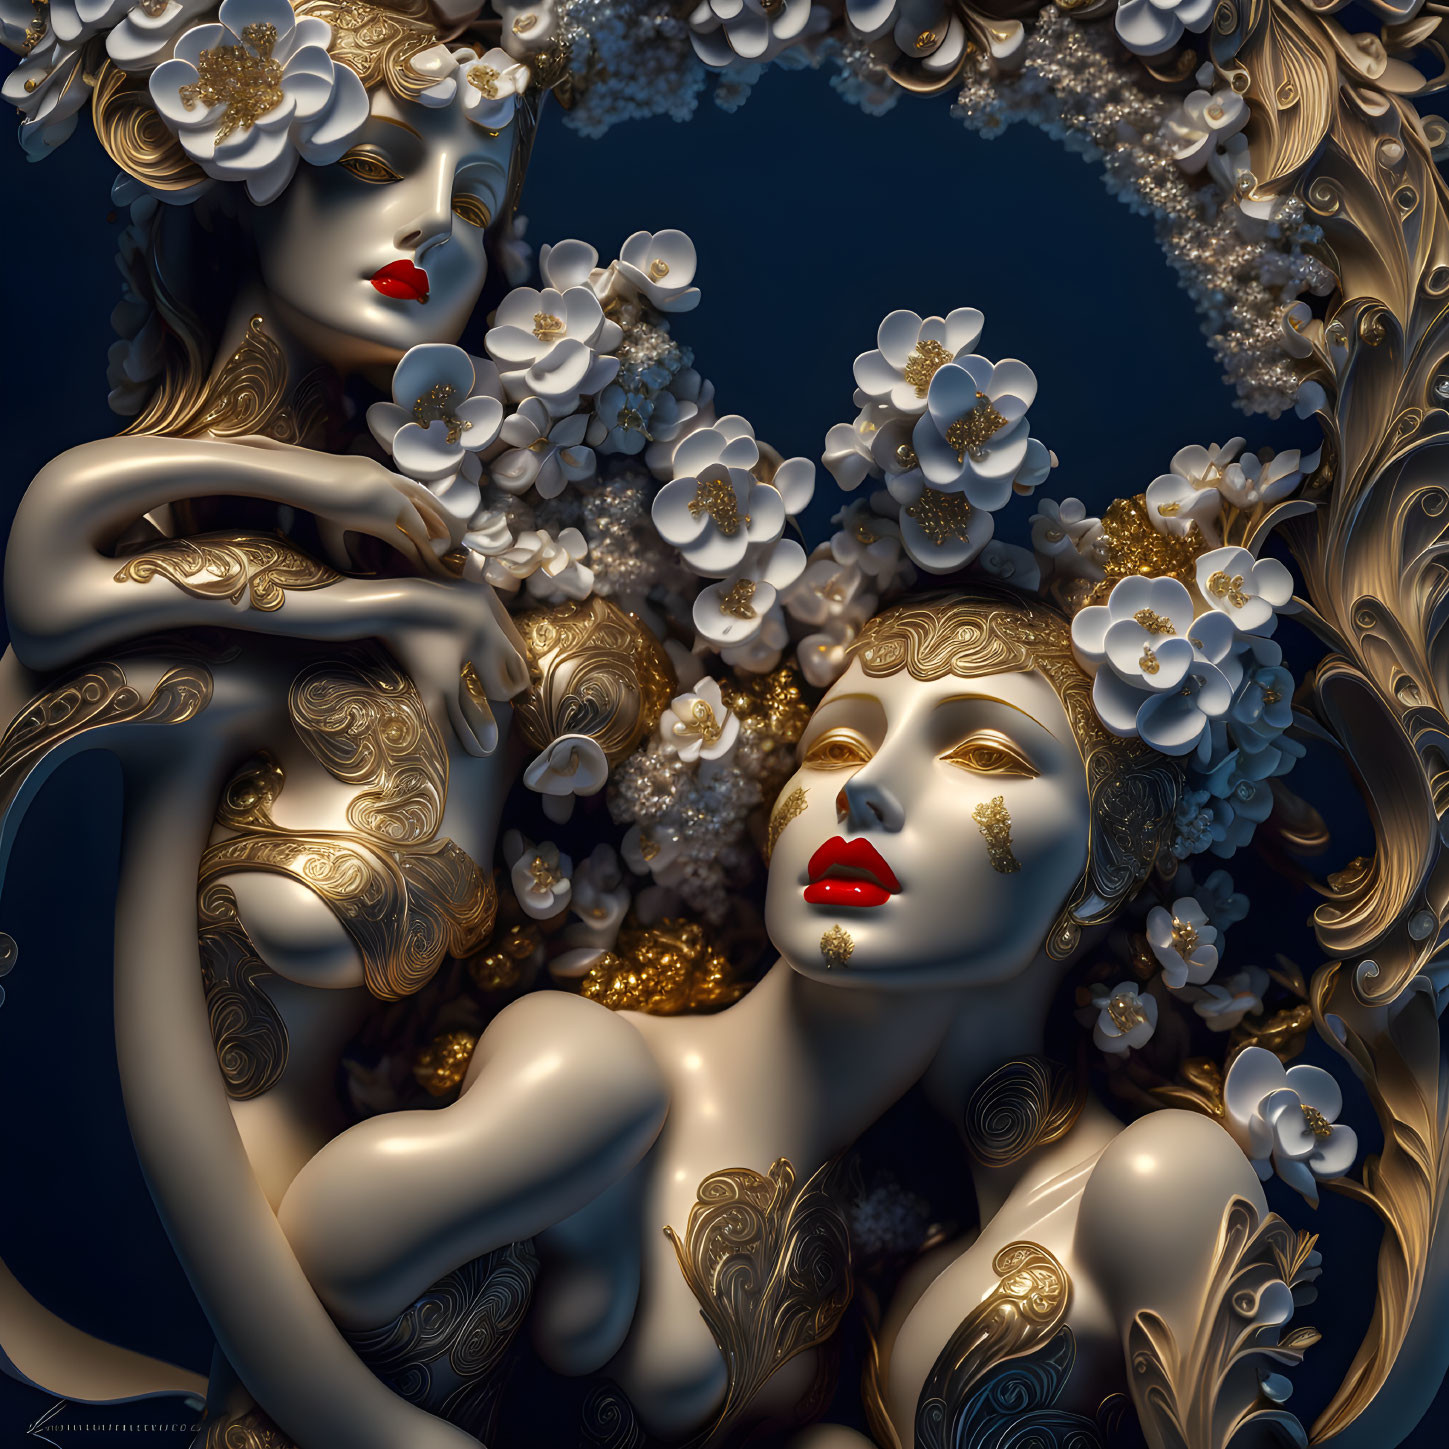 Golden statuesque figures with floral adornments in a dark setting surrounded by white blossoms